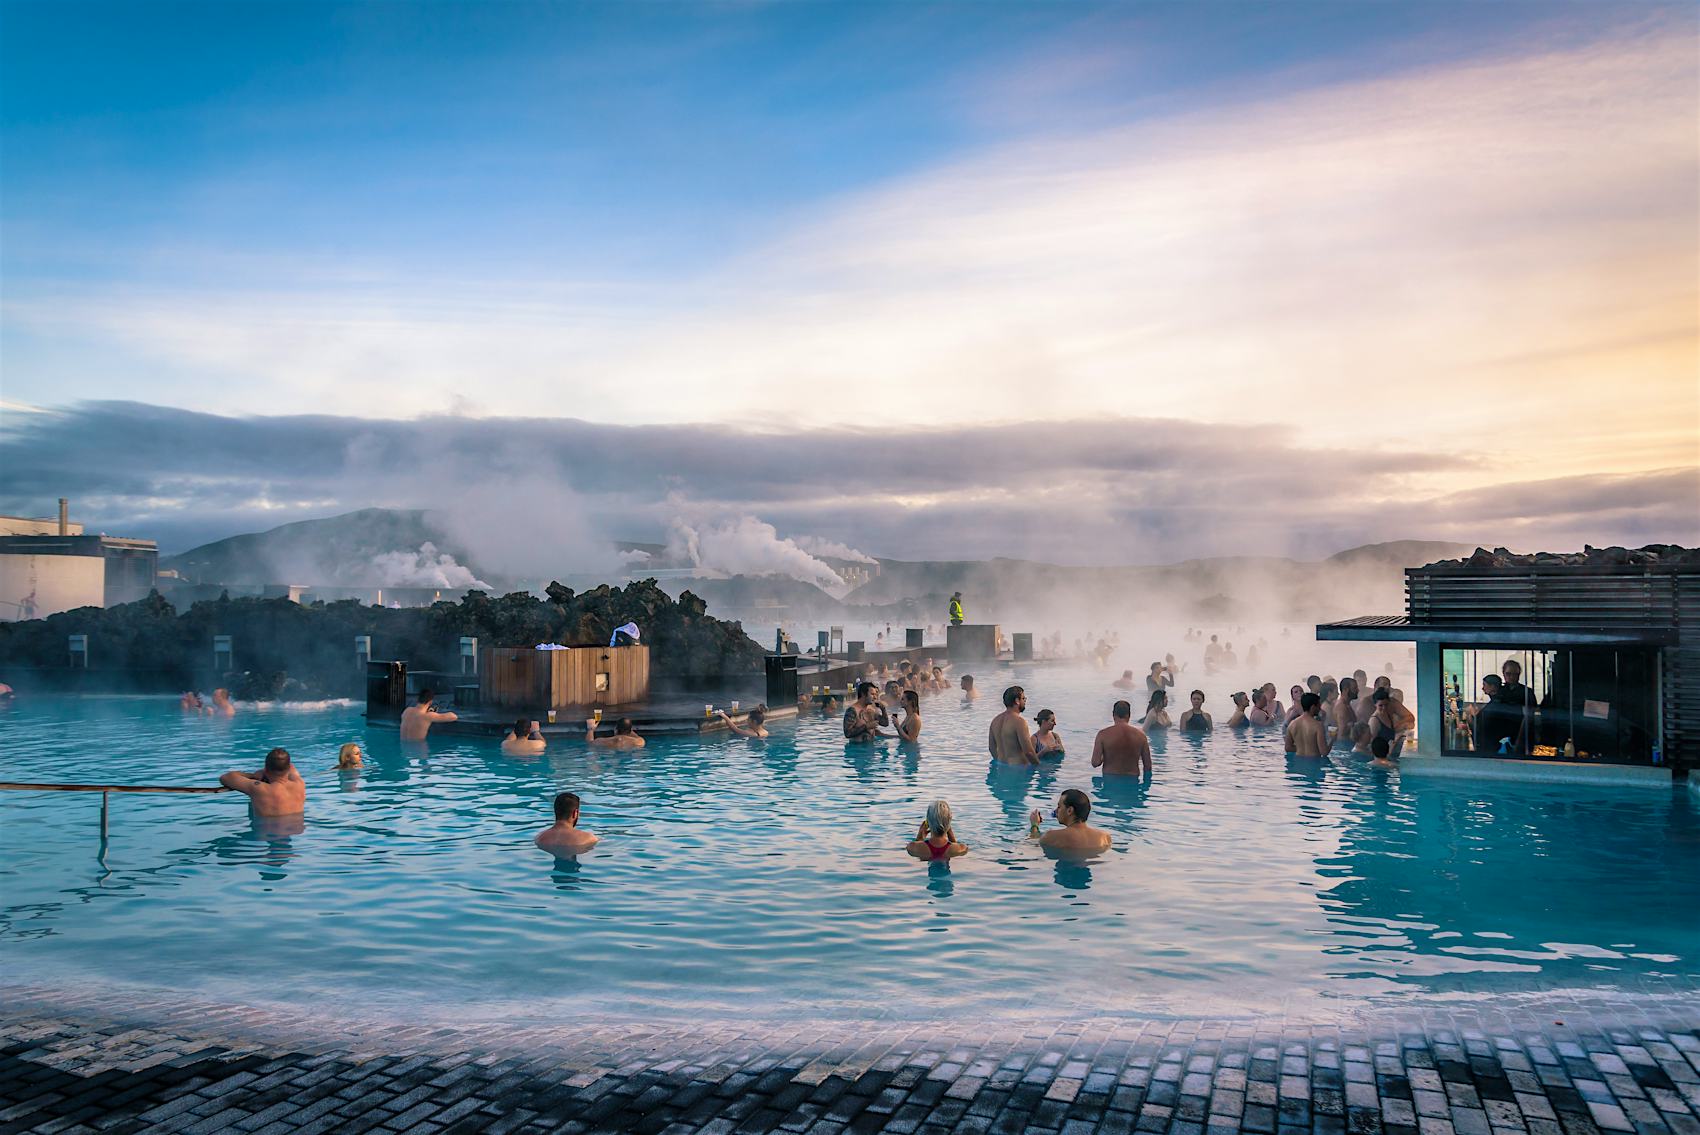 Iceland has opened its borders to vaccinated travelers ©Roberto La Rosa/Shutterstock